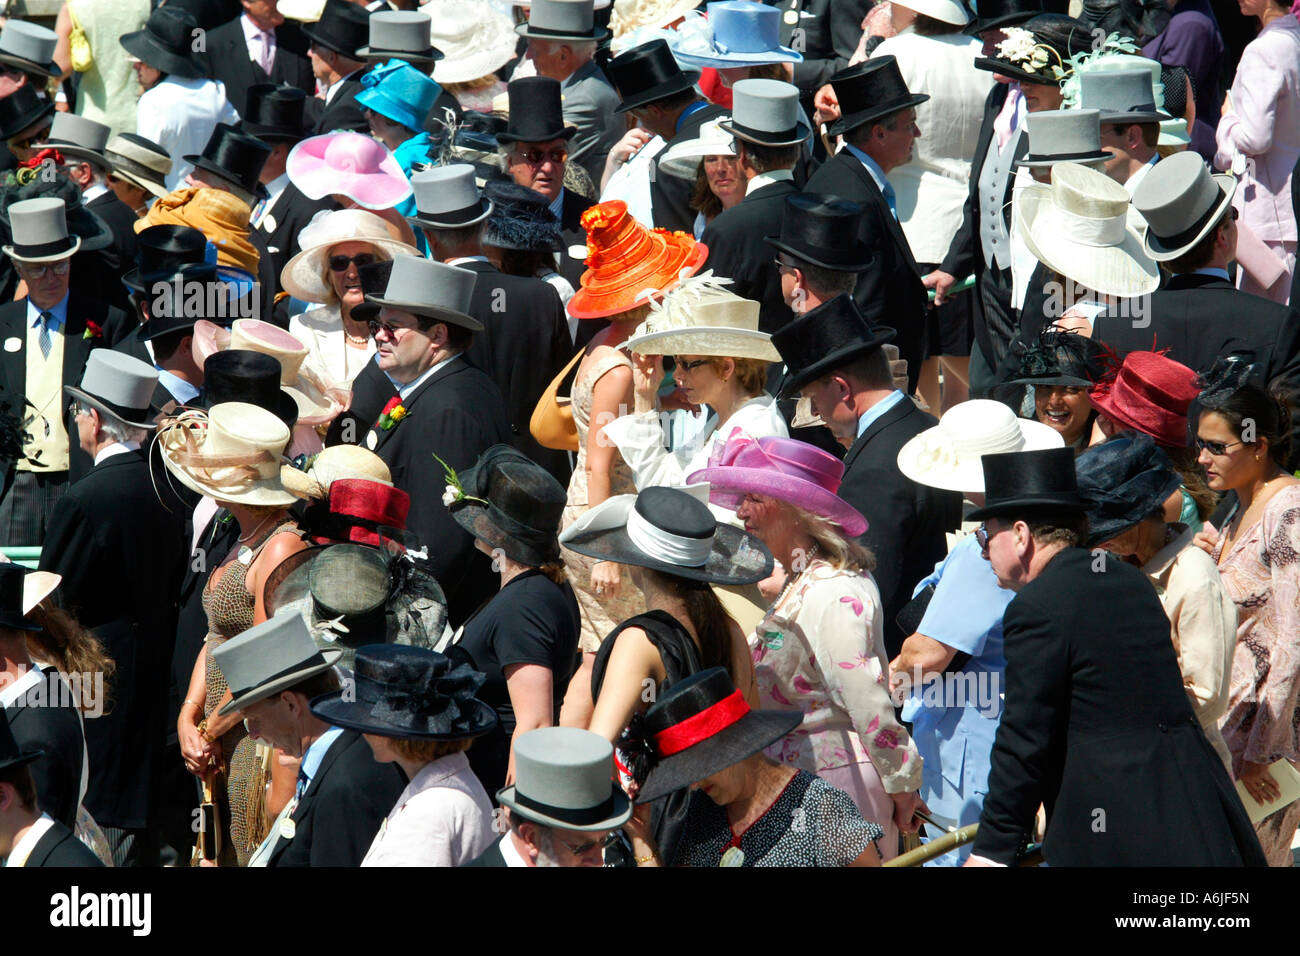 People at horse races, Royal Ascot, Great Britain Stock Photo